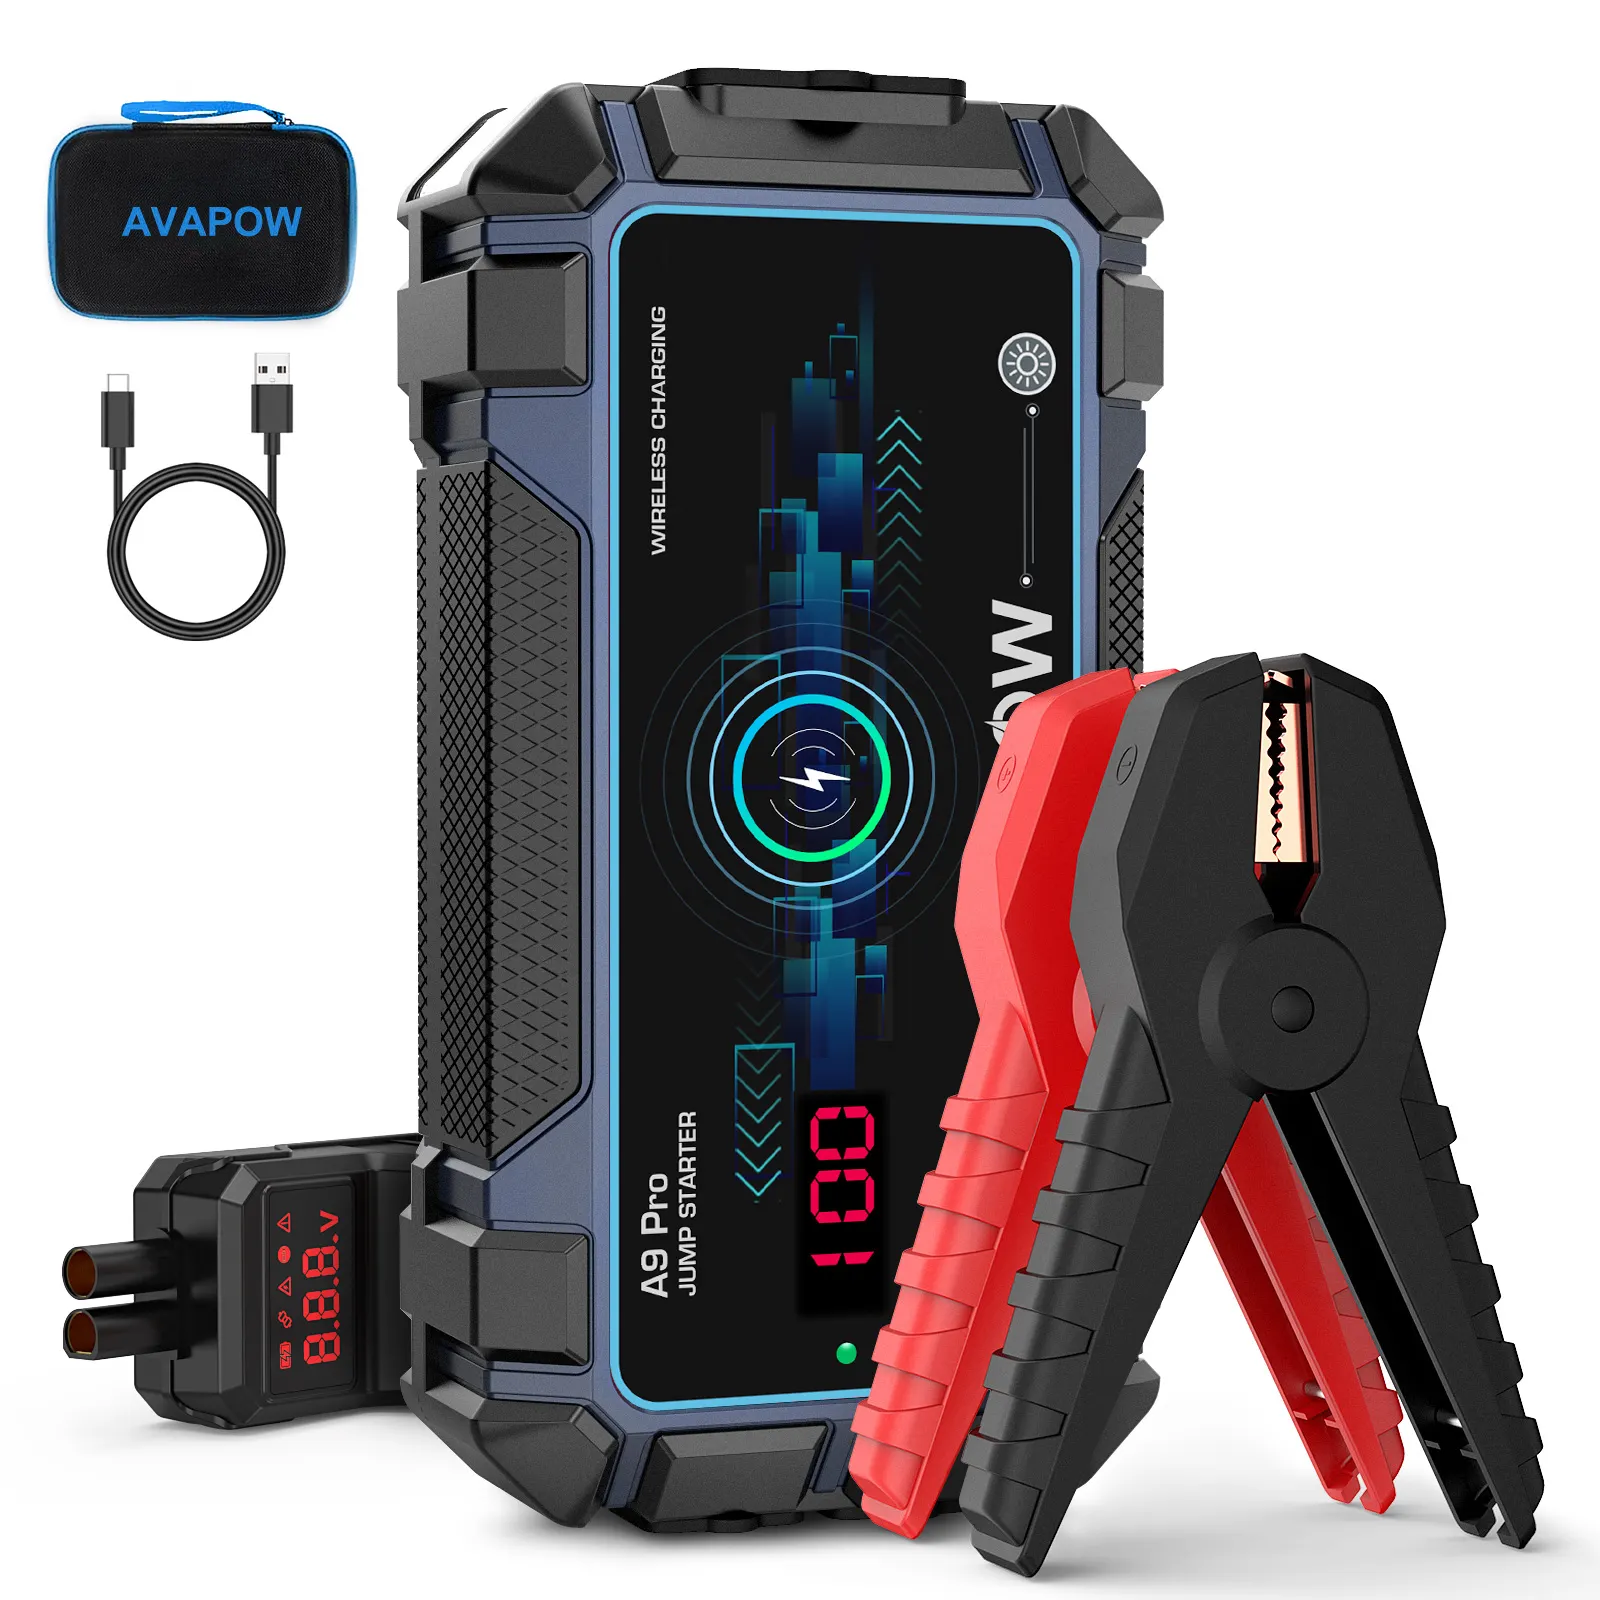 AVAPOW A9 Pro 2500A 16000mAh 3in1 IP65 Car Jump Starter Support Wireless Charging